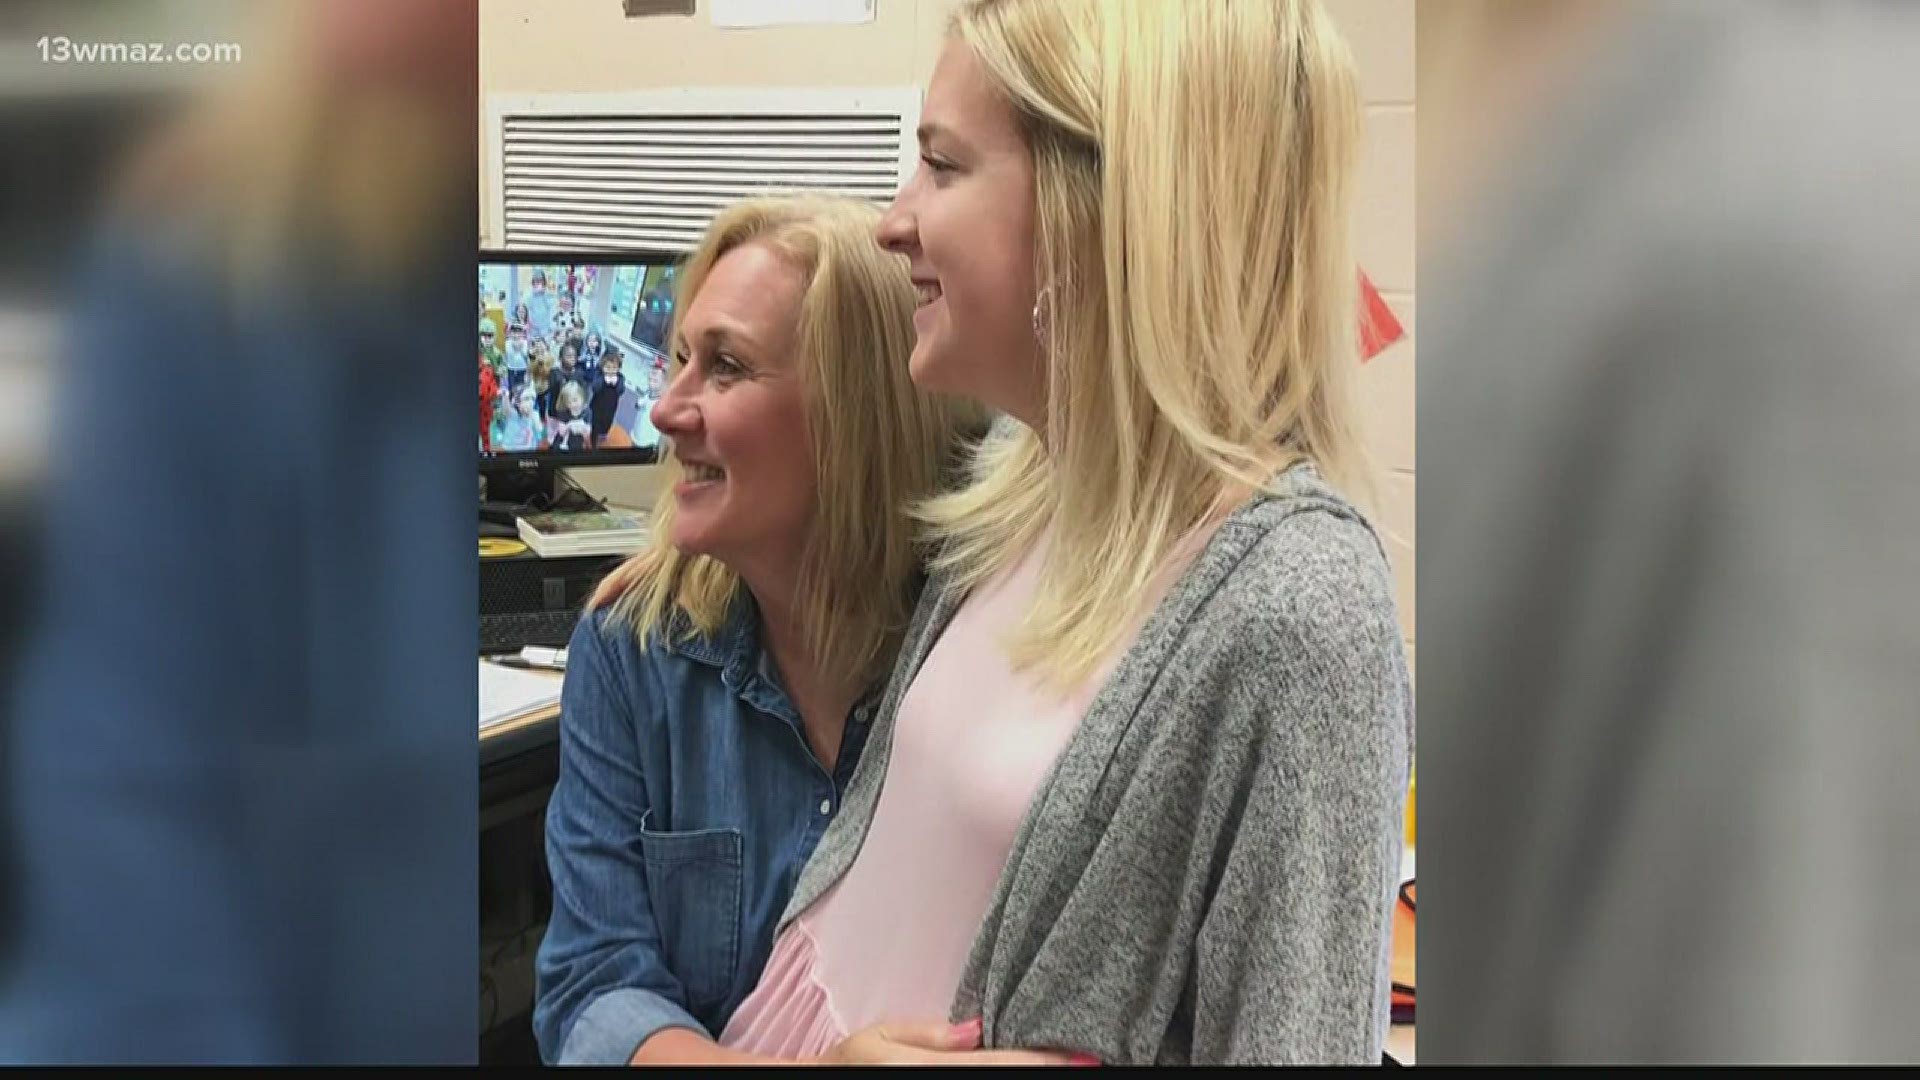 Tonia McDermott is retiring from teaching kindergarten at Quail Run Elementary School after 31 years. Her former student Emily Bowlin will take her place.